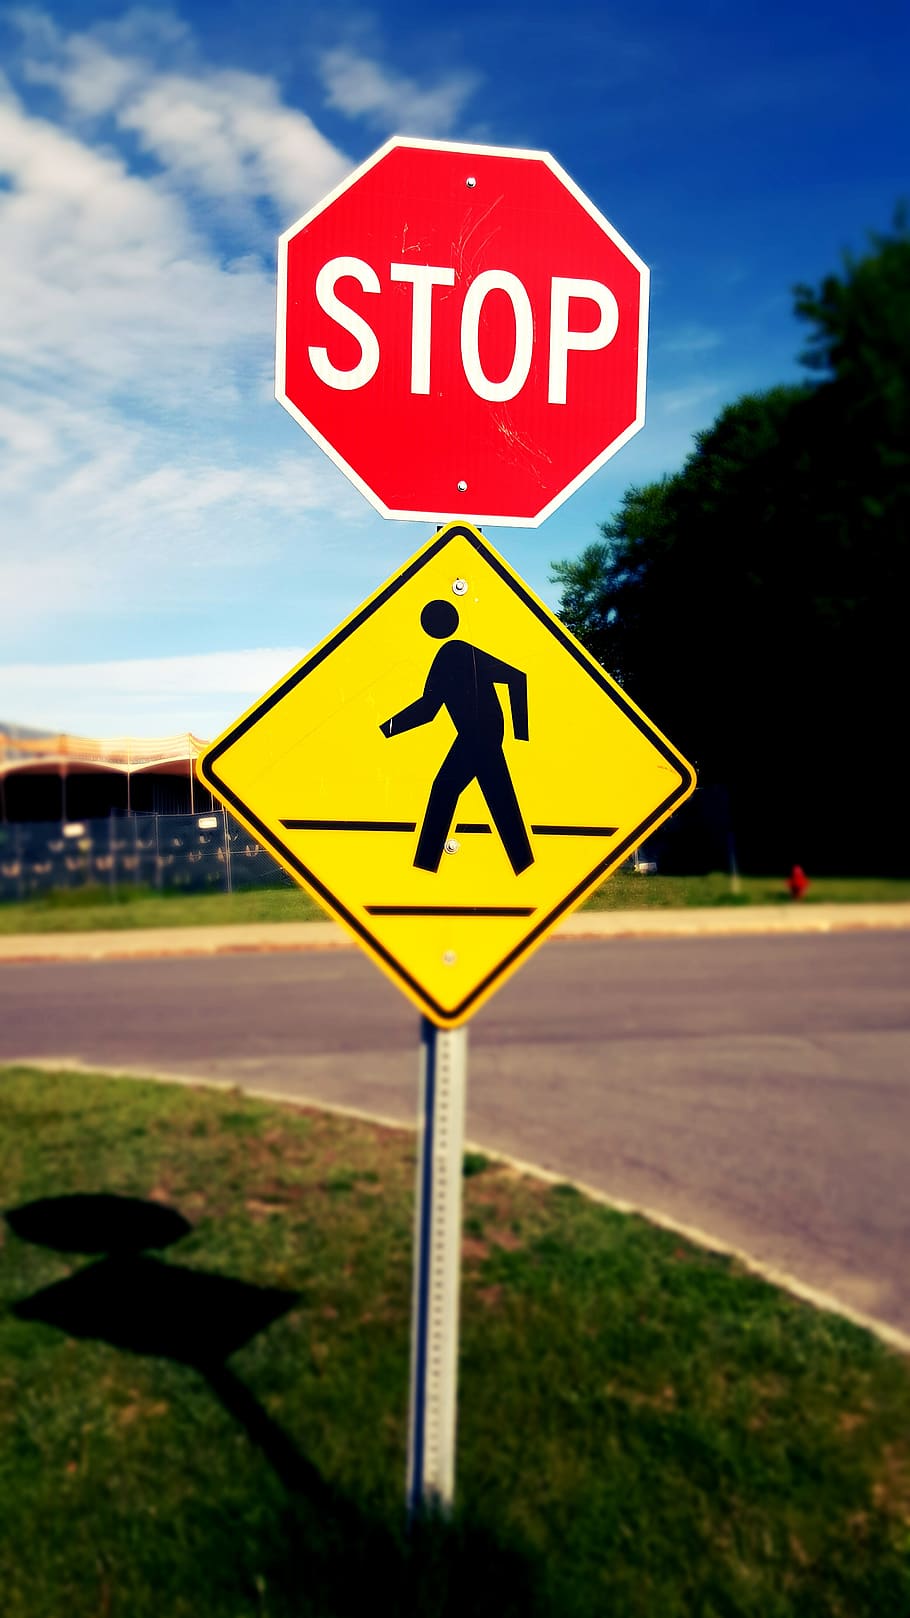 pedestrian crossing, pedestrian zone, pedestrians, road sign, sign, stop, communication, road, warning sign, text